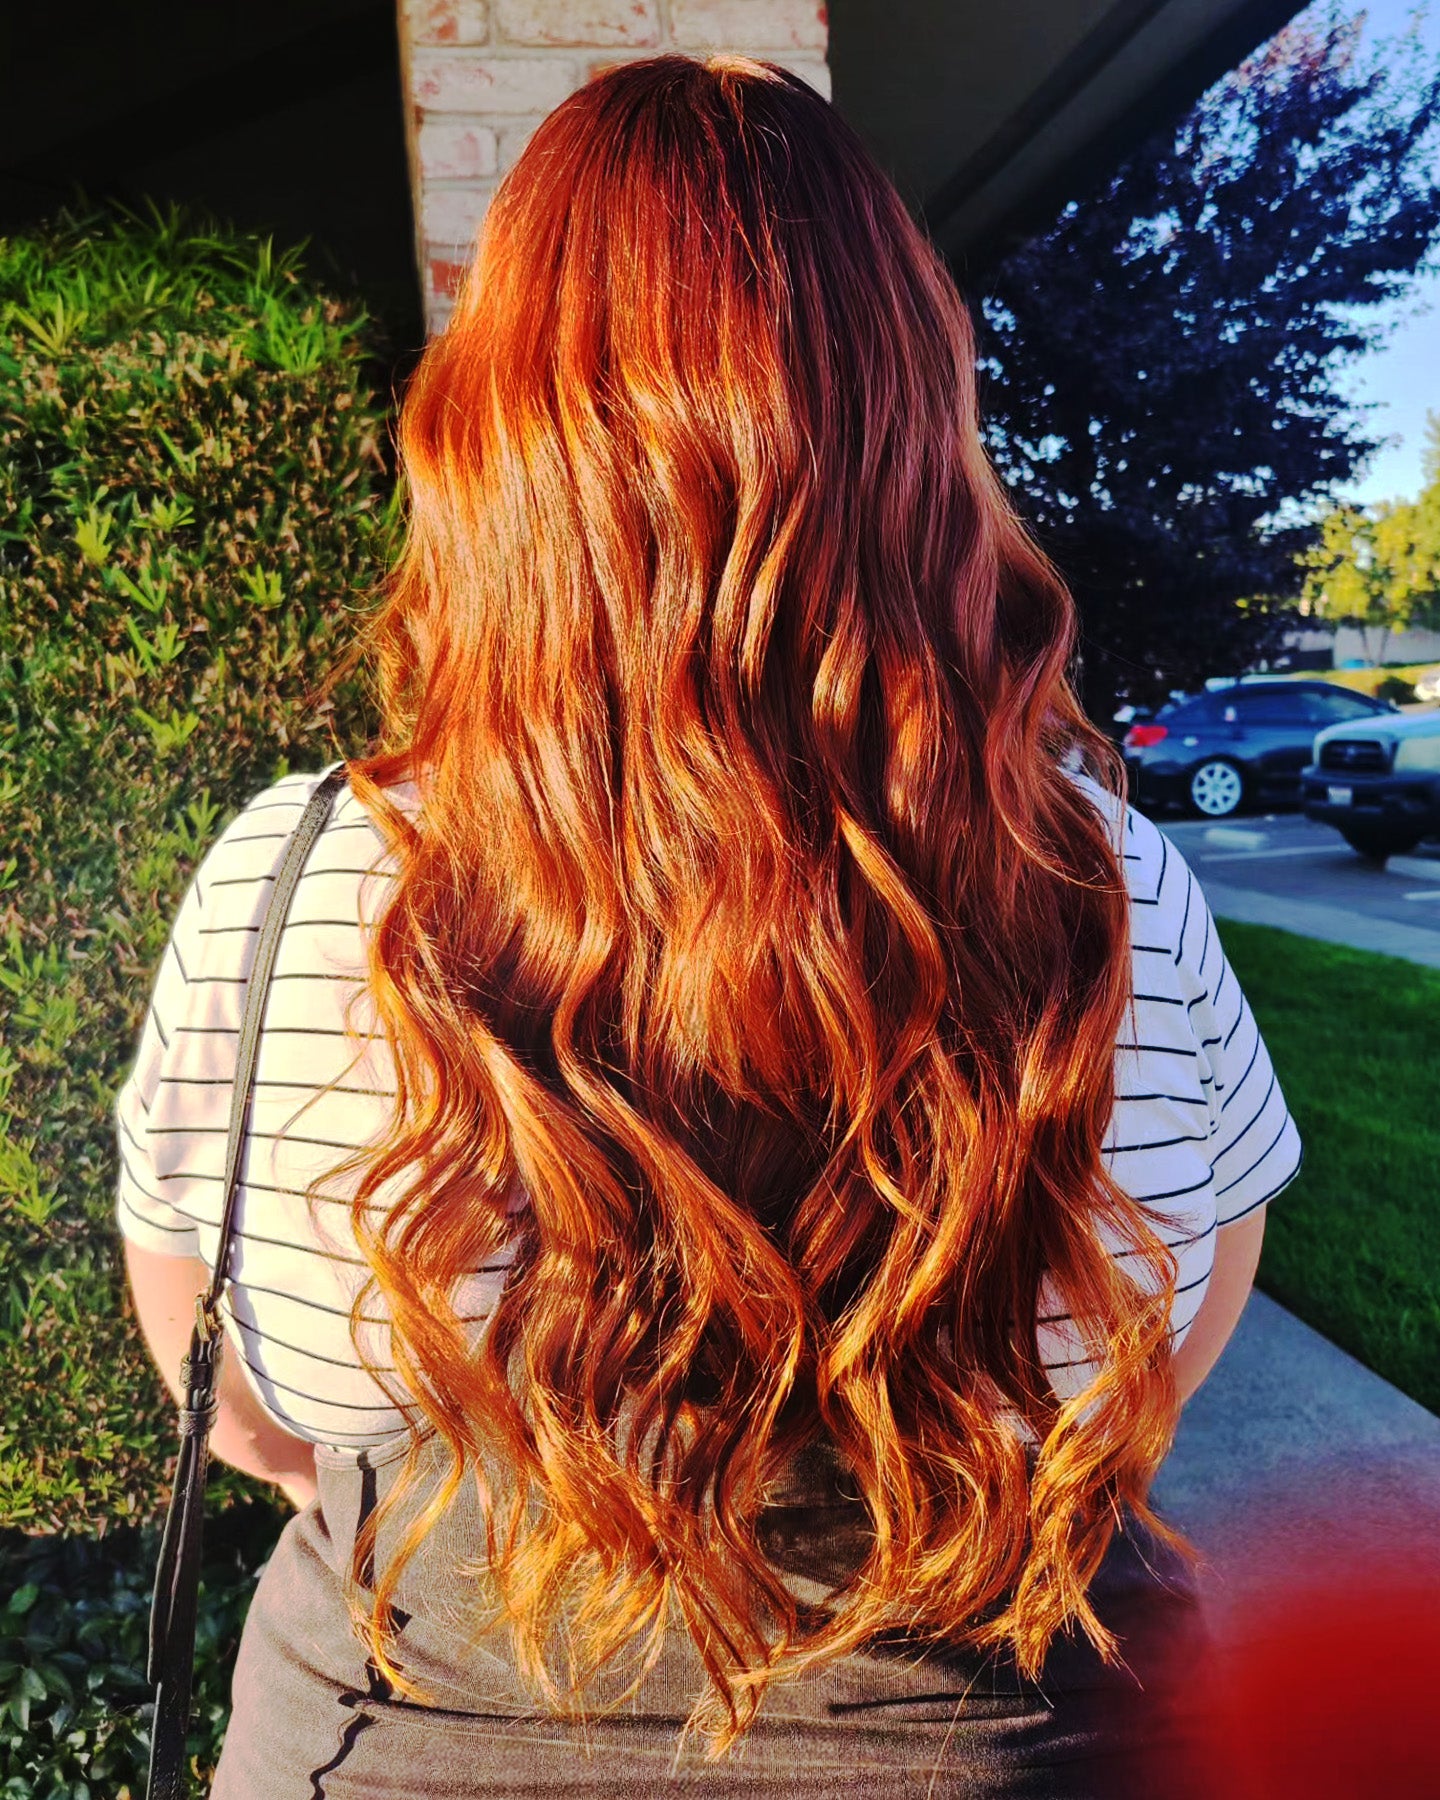 Cowboy copper hair color and hair extension trend by Mane by Crystal Motzkus in Manteca CA